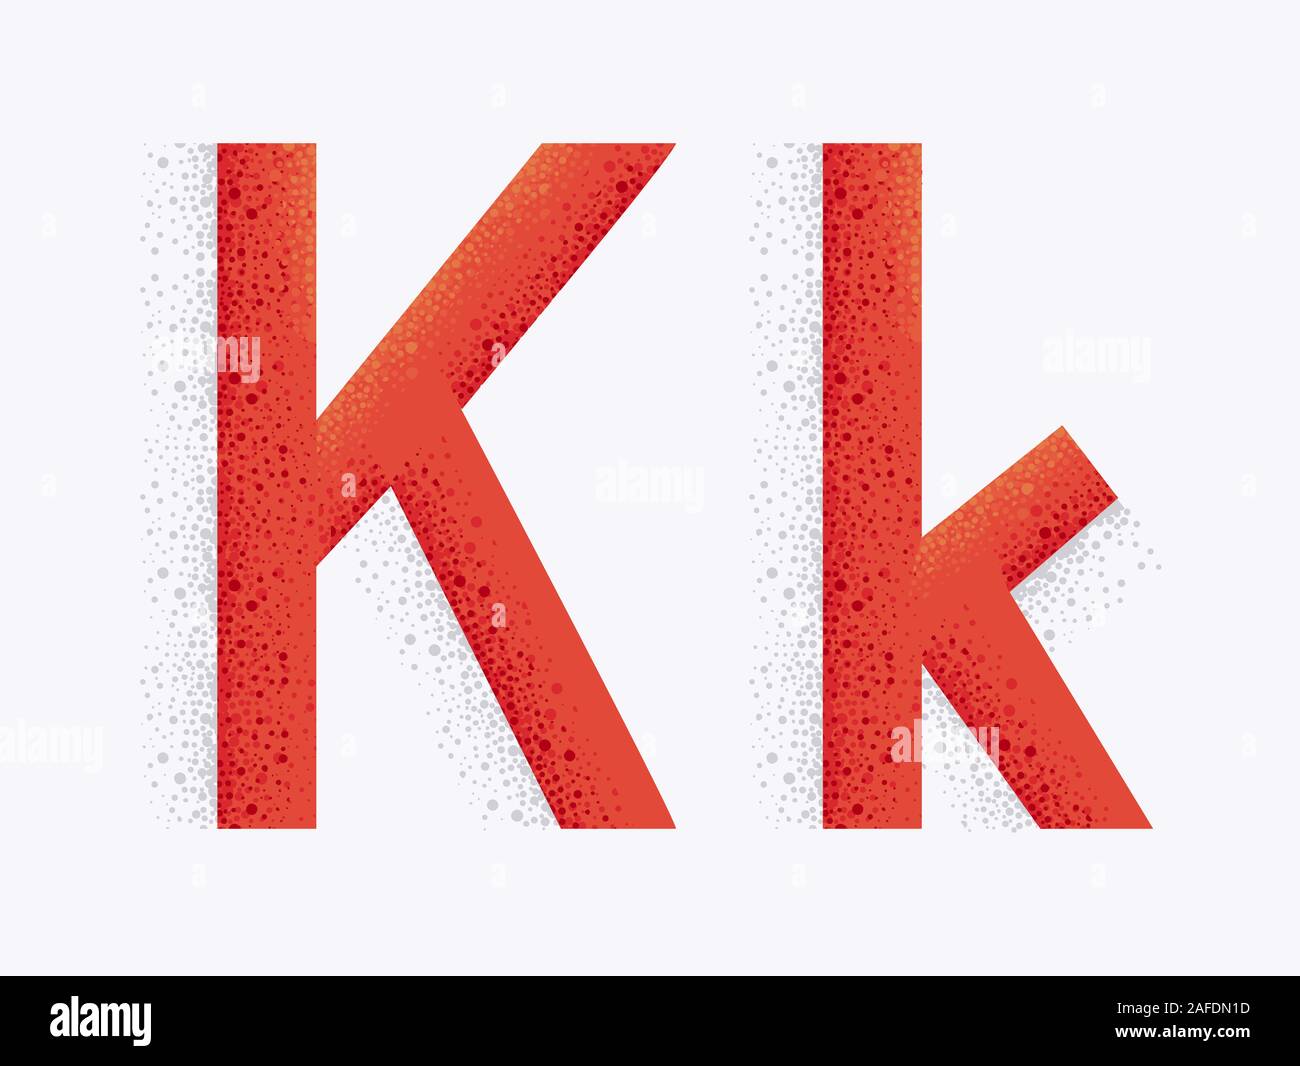 Letter K outline as a large office building Stock Photo - Alamy